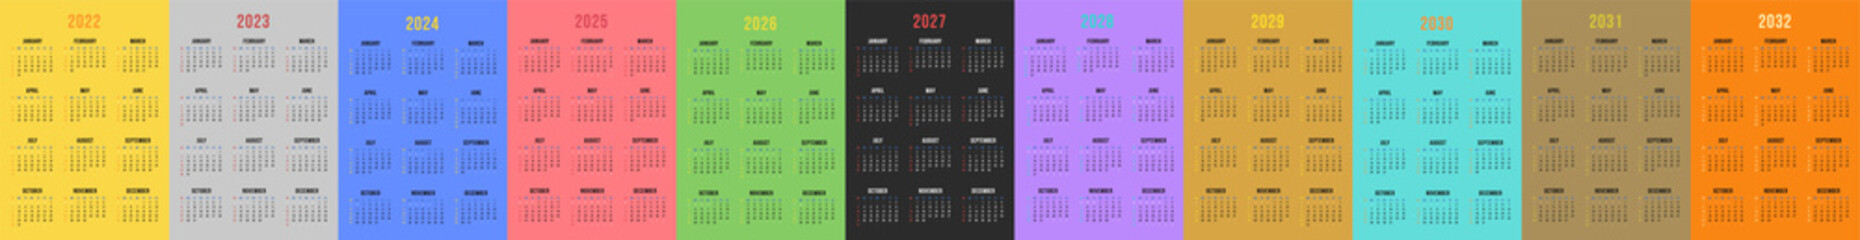 One Page Business calendars for 2023, 2024, 2025, 2026, 2027, 2028, 2029, 2030, 2031,2032 years. 12 months vertical calendar planners template design for 2023 year. Starts on Sunday.